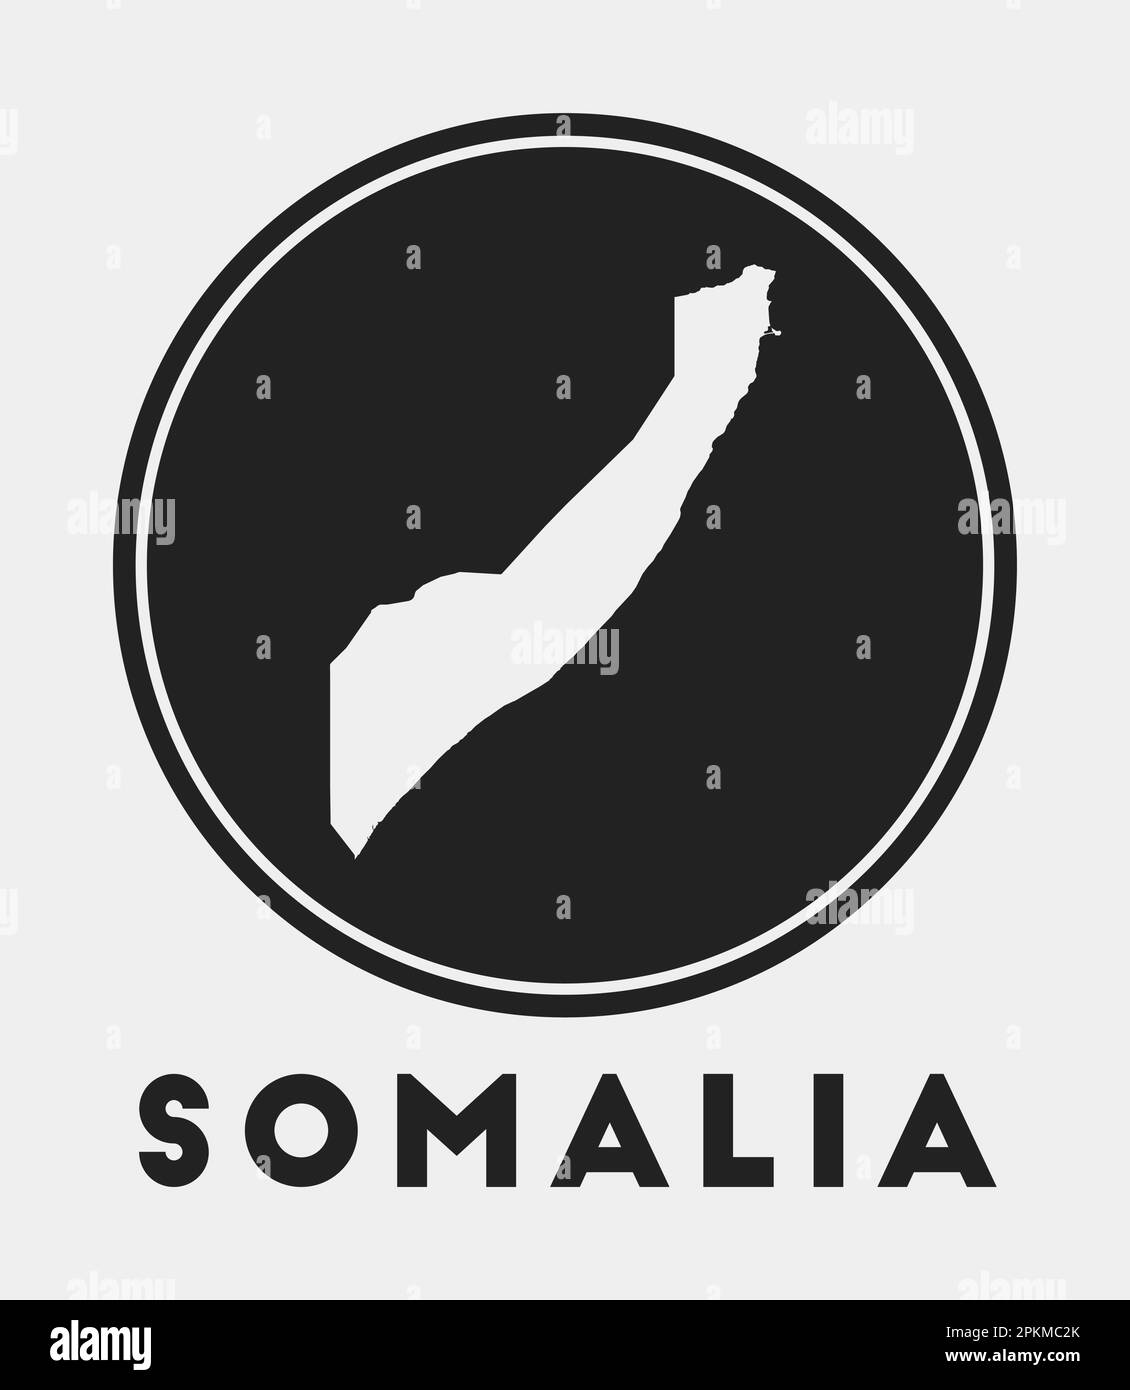 Somalia icon. Round logo with country map and title. Stylish Somalia badge with map. Vector illustration. Stock Vector